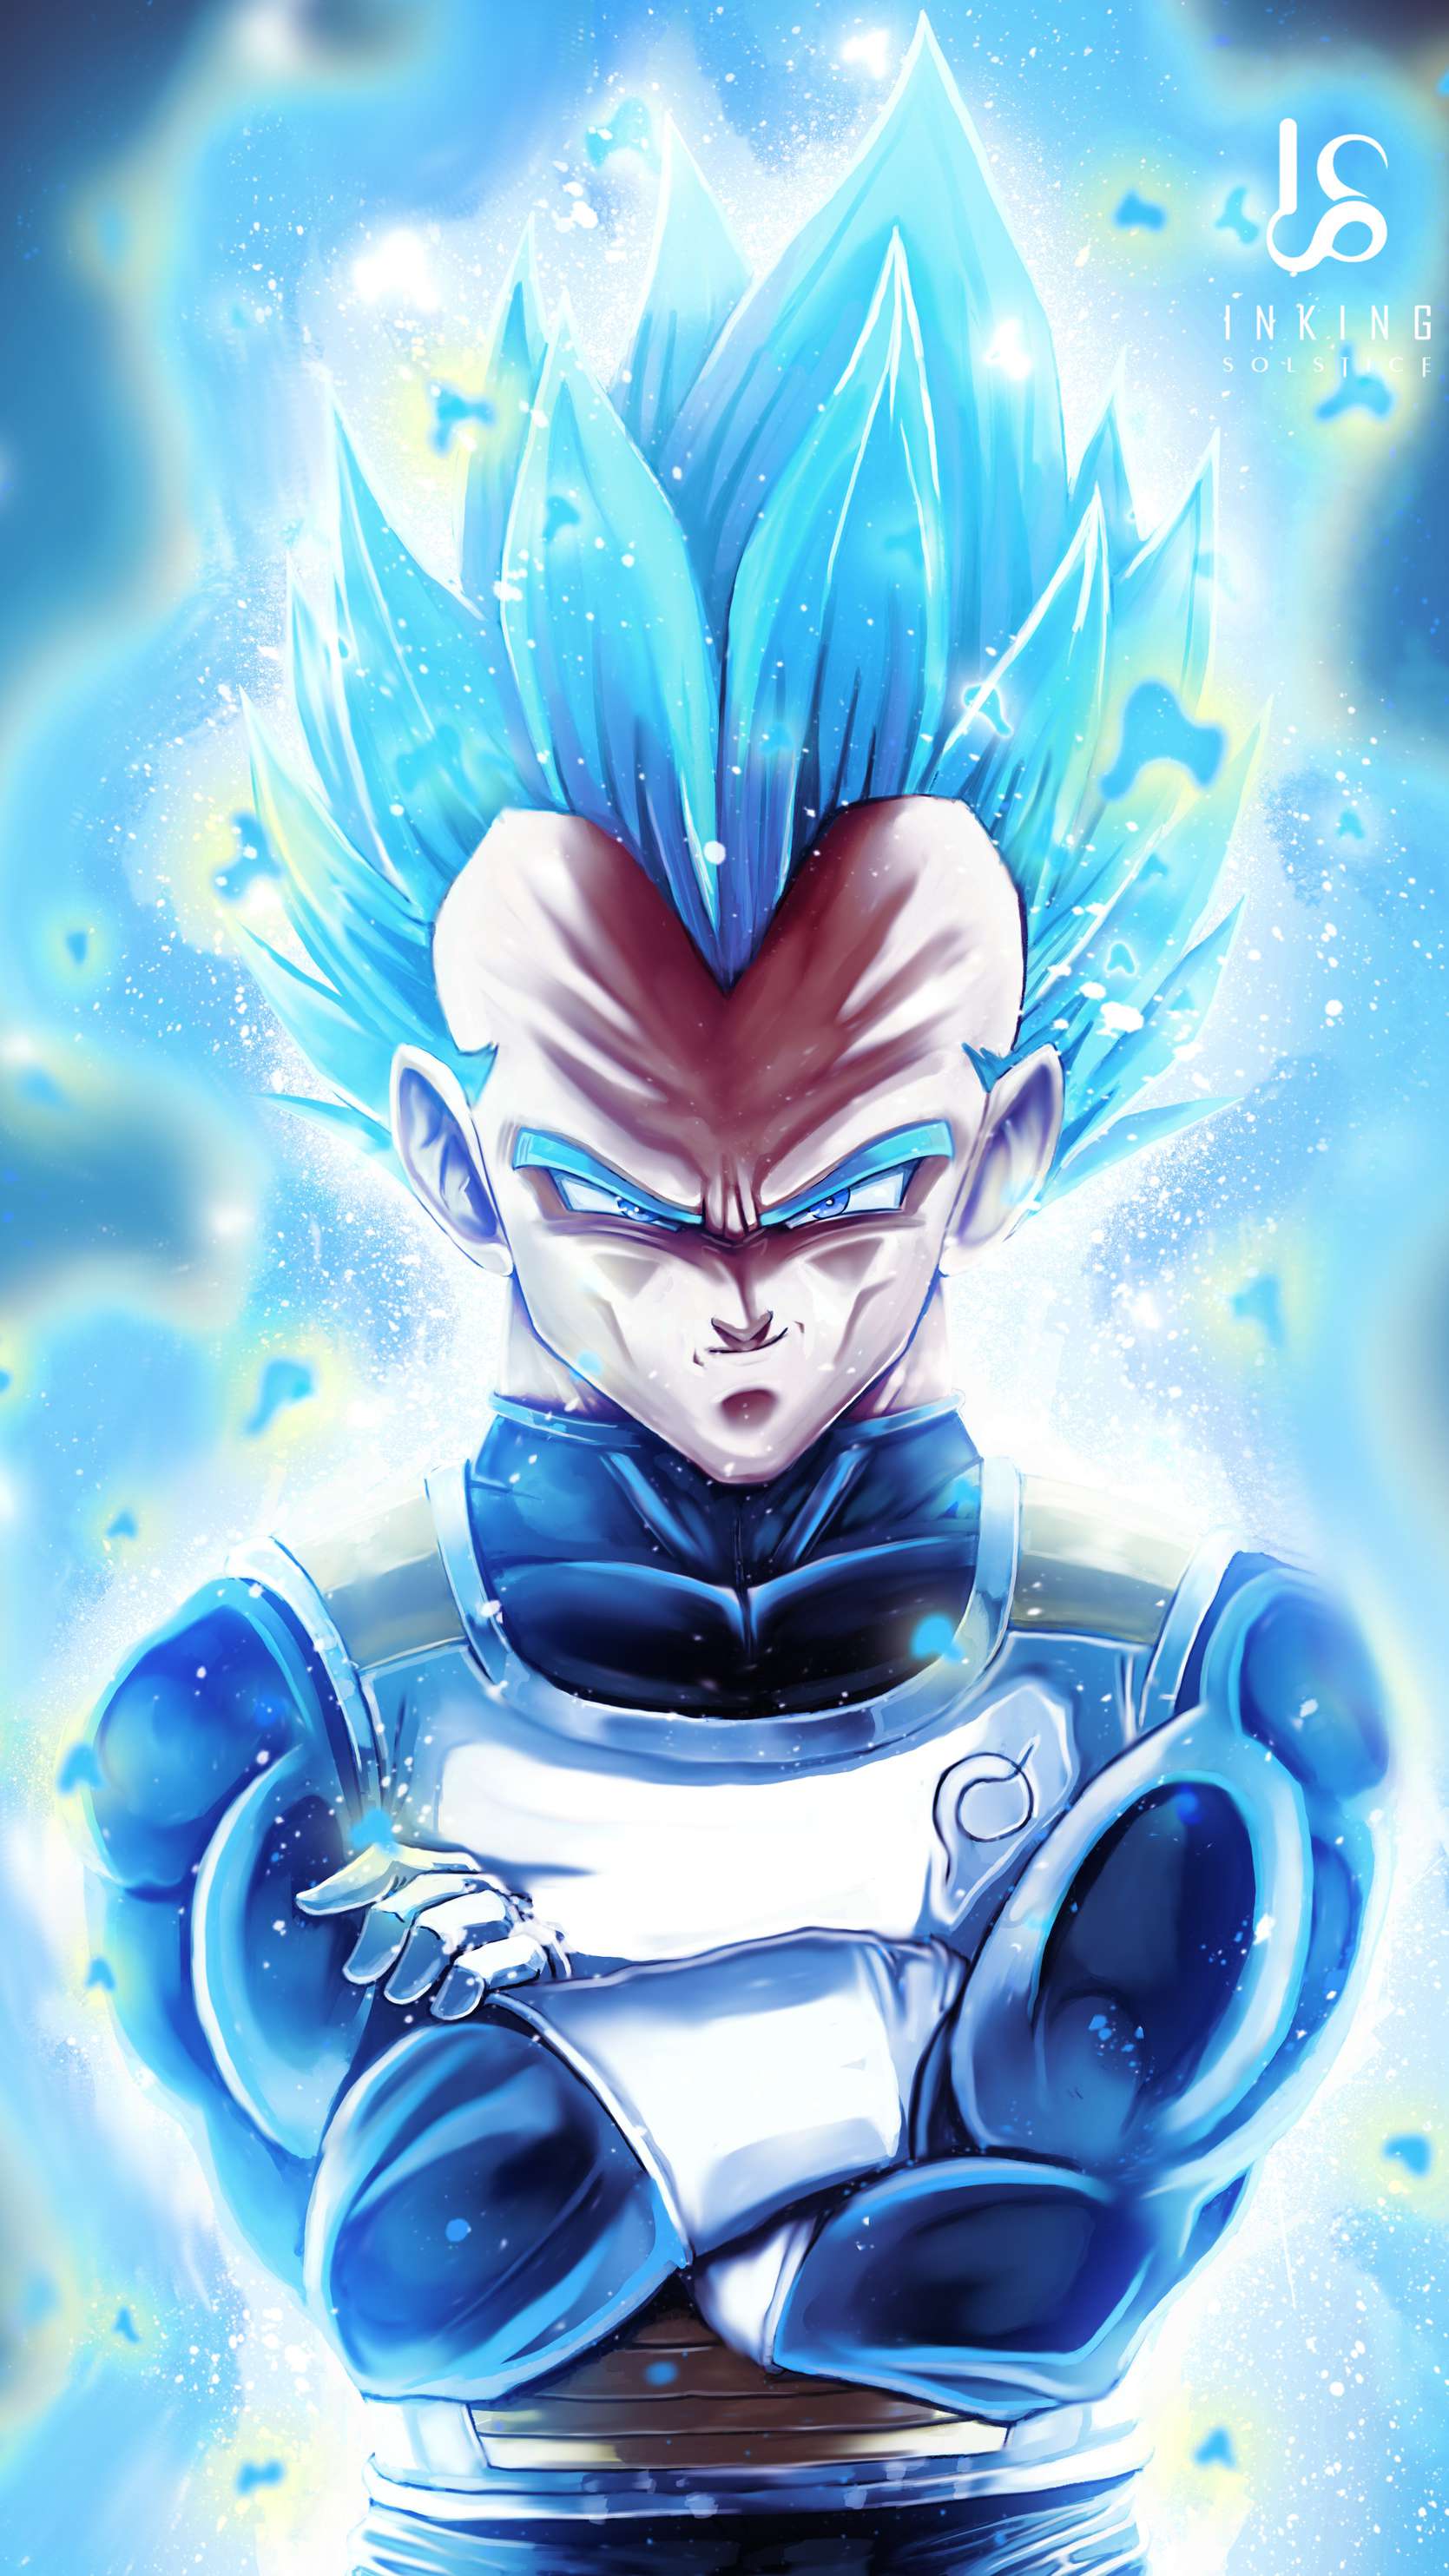 Anime Wallpapers - iPhone Wallpapers  Dragon ball super goku, Dragon ball  wallpaper iphone, Dragon ball super wallpapers